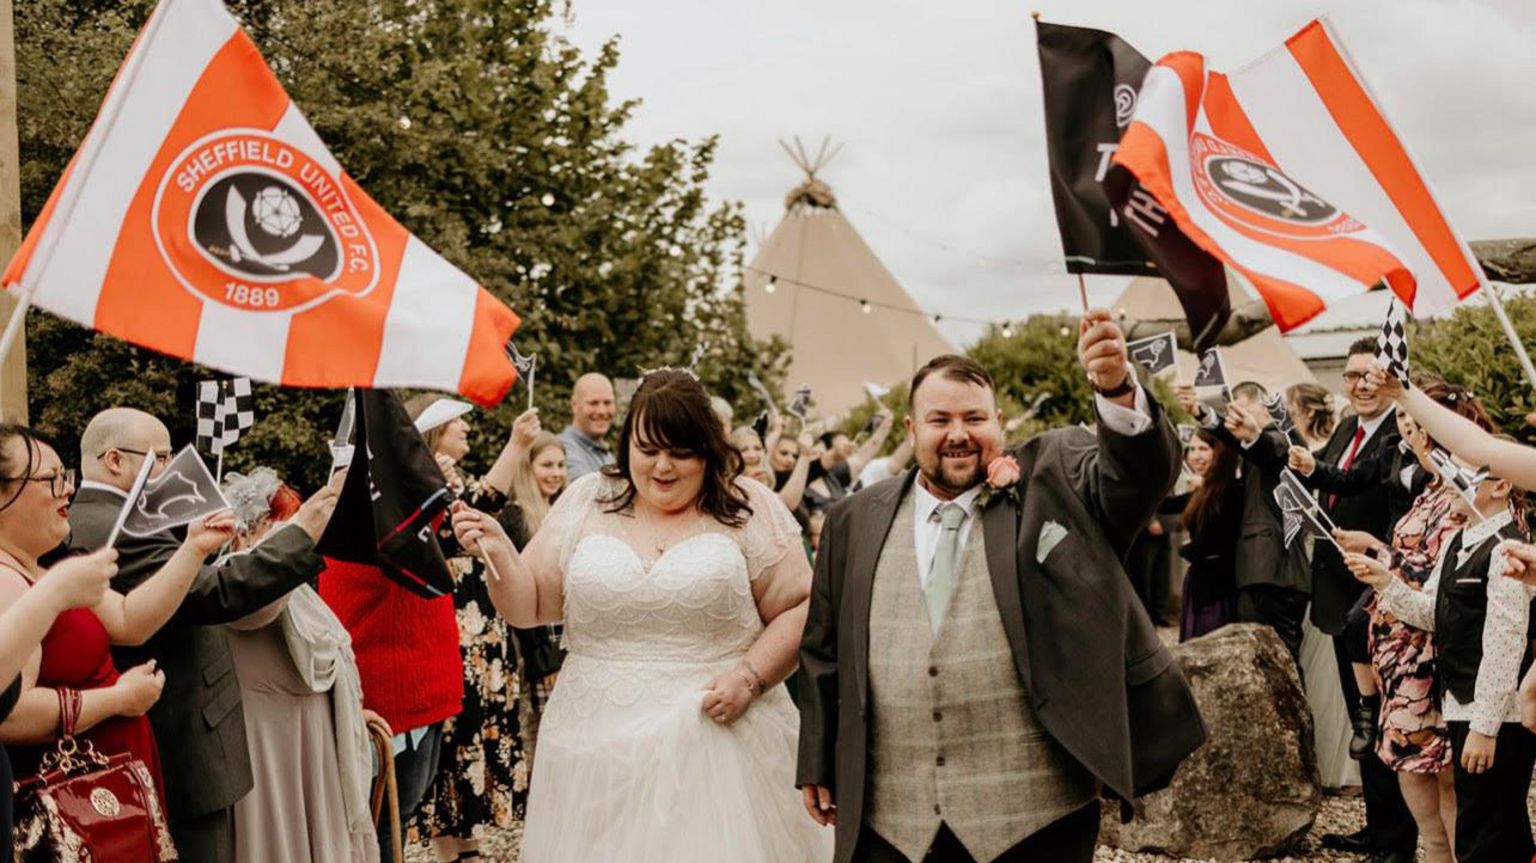 A couple had confetti thrown over them by wedding-goers with flags waving behind them